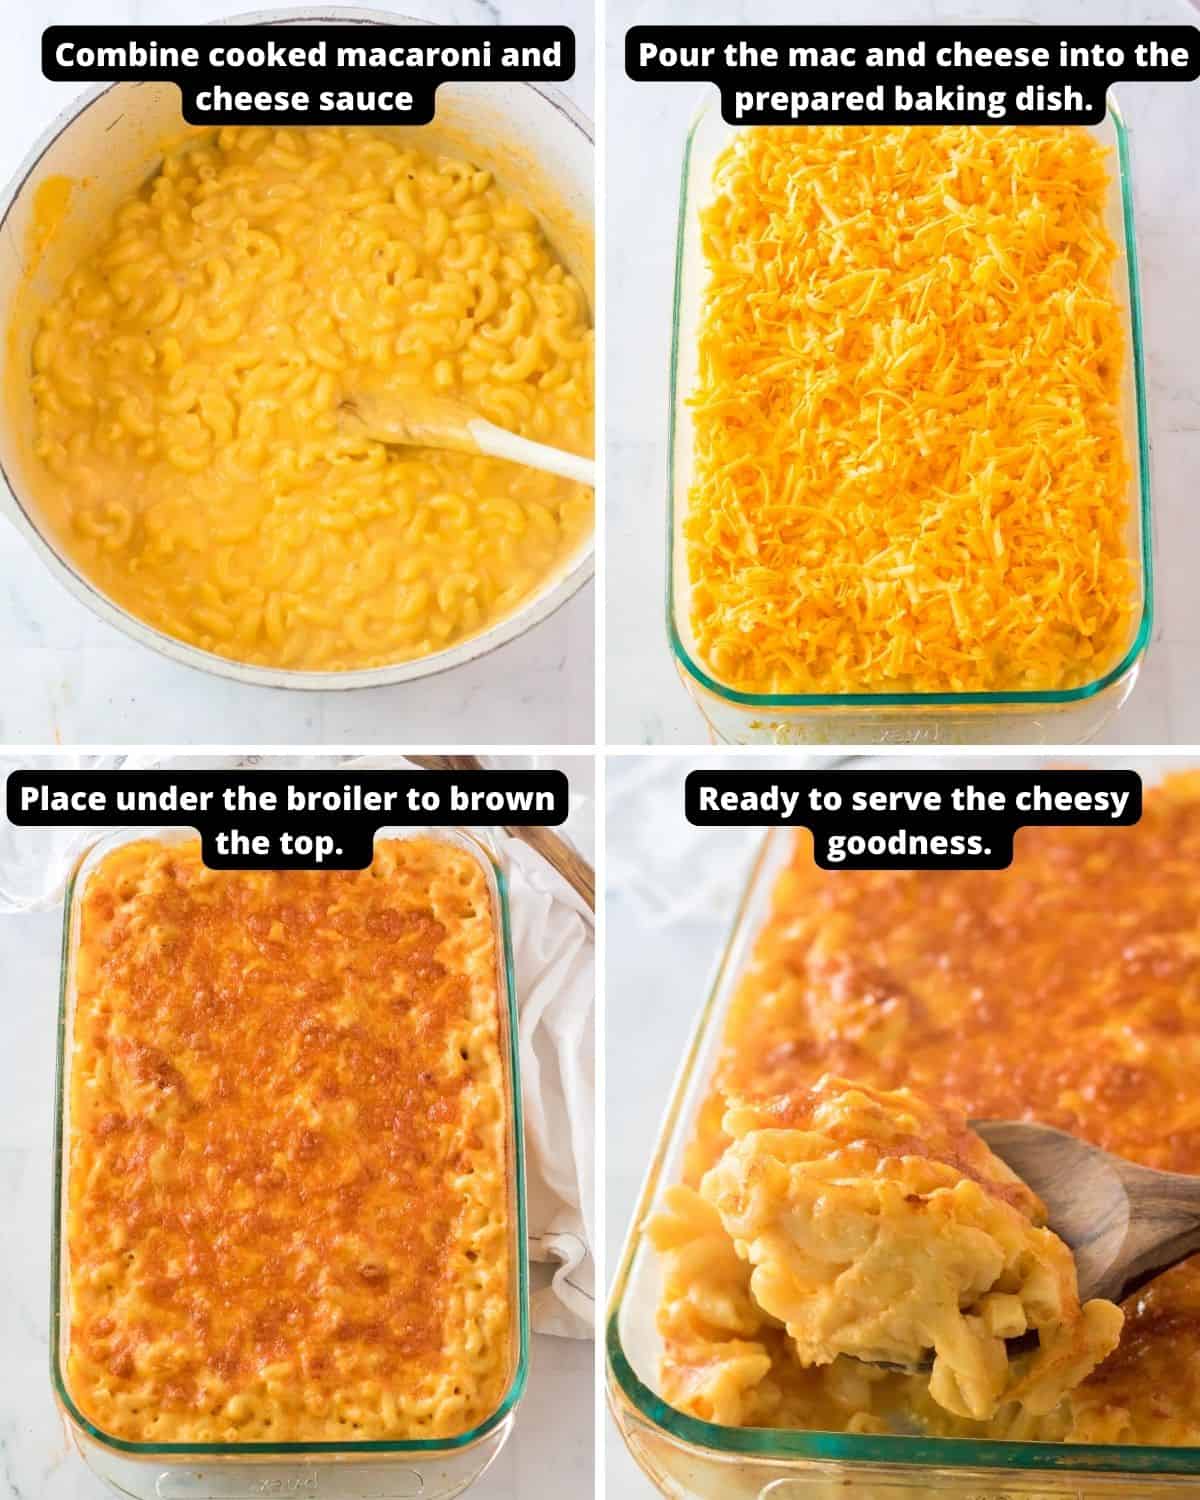 Instructions with text overlay of how to make chick fil a mac and cheese in a casserole dish.